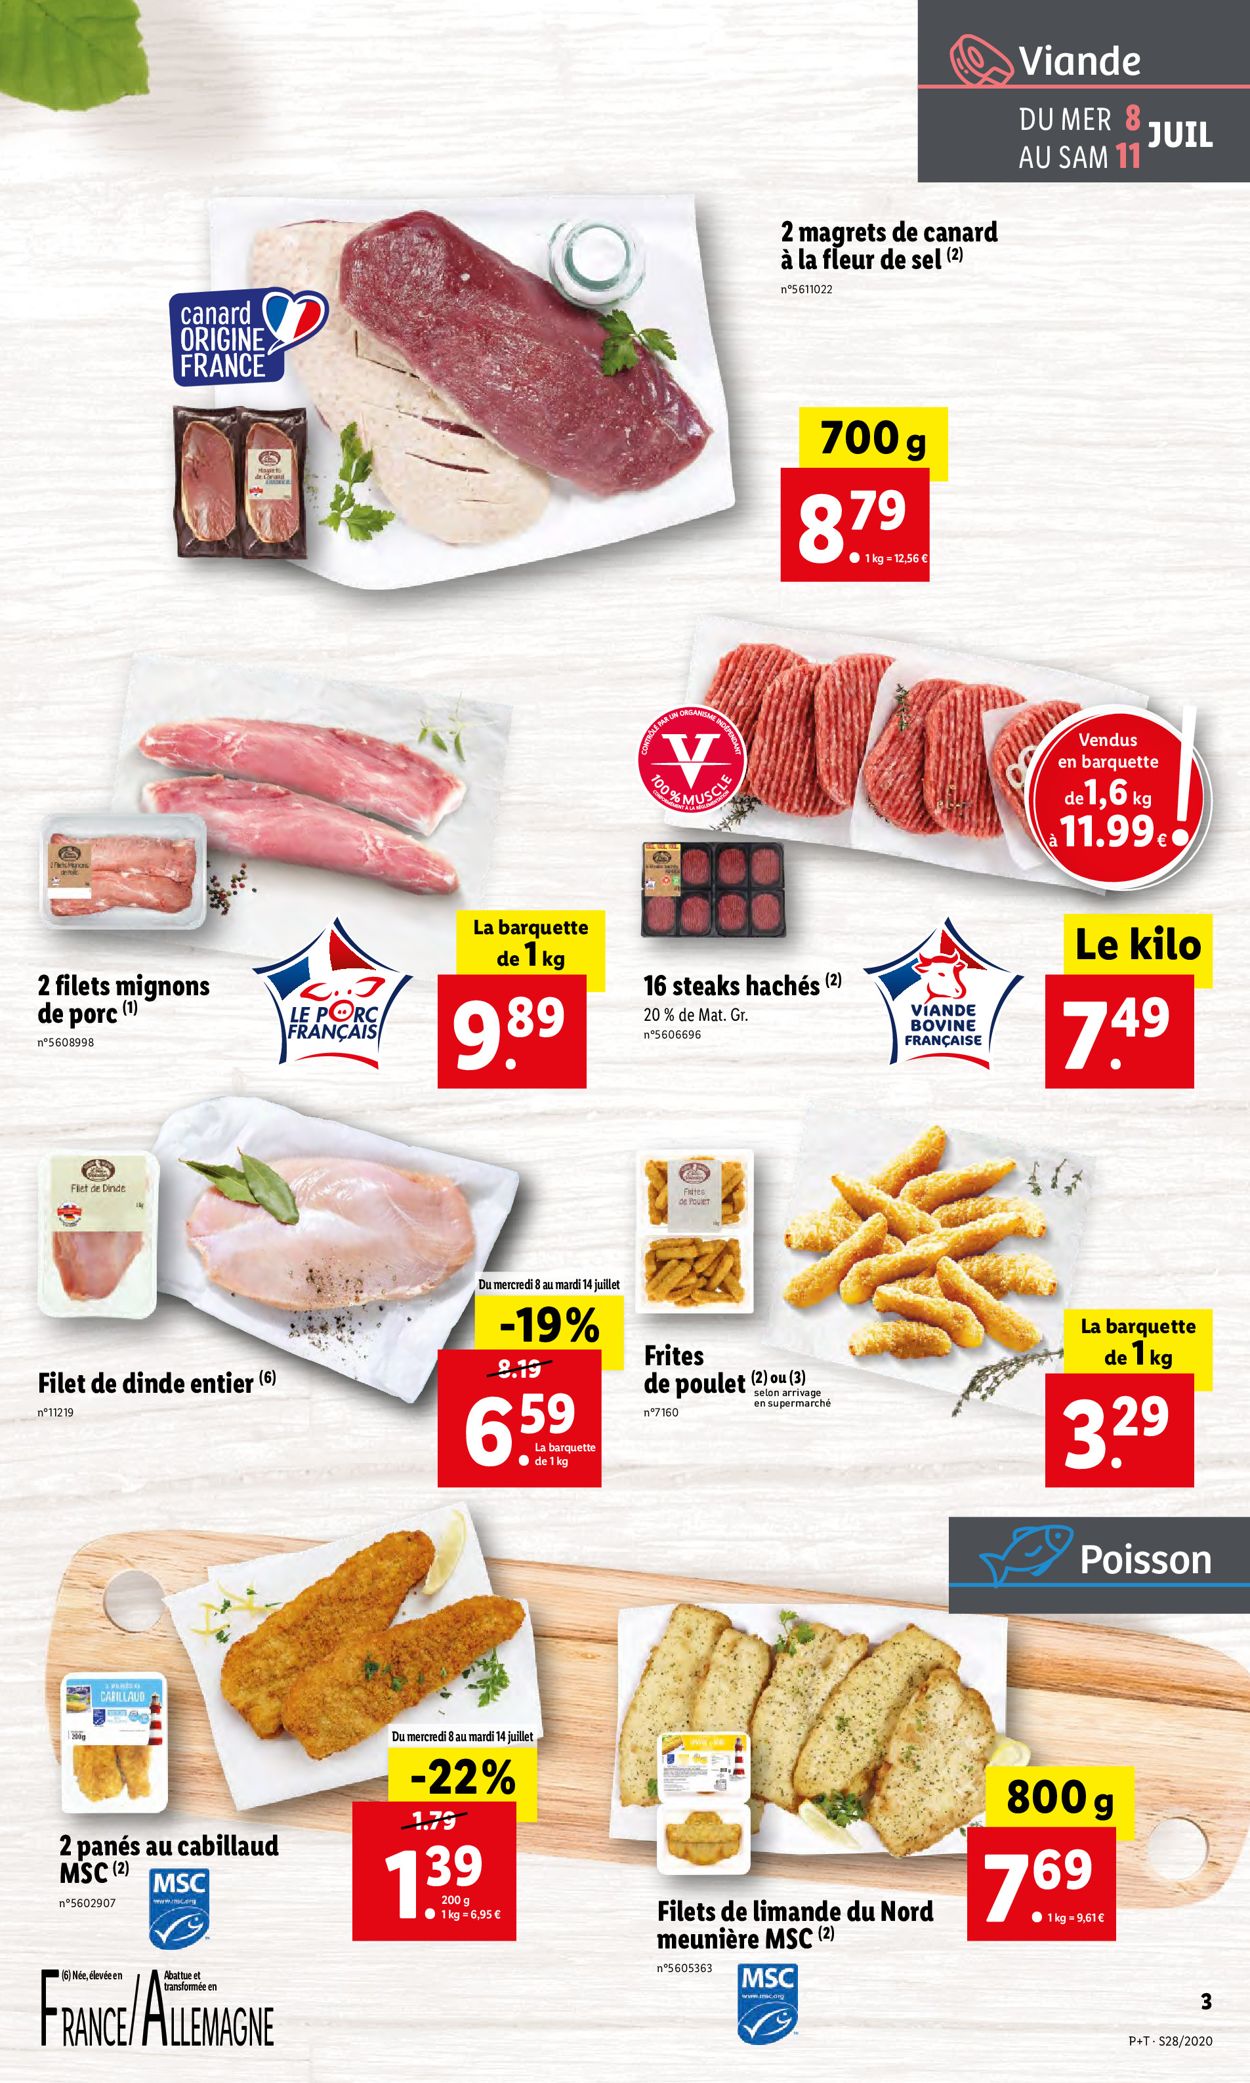 Lidl Catalogue - 08.07-14.07.2020 (Page 3)